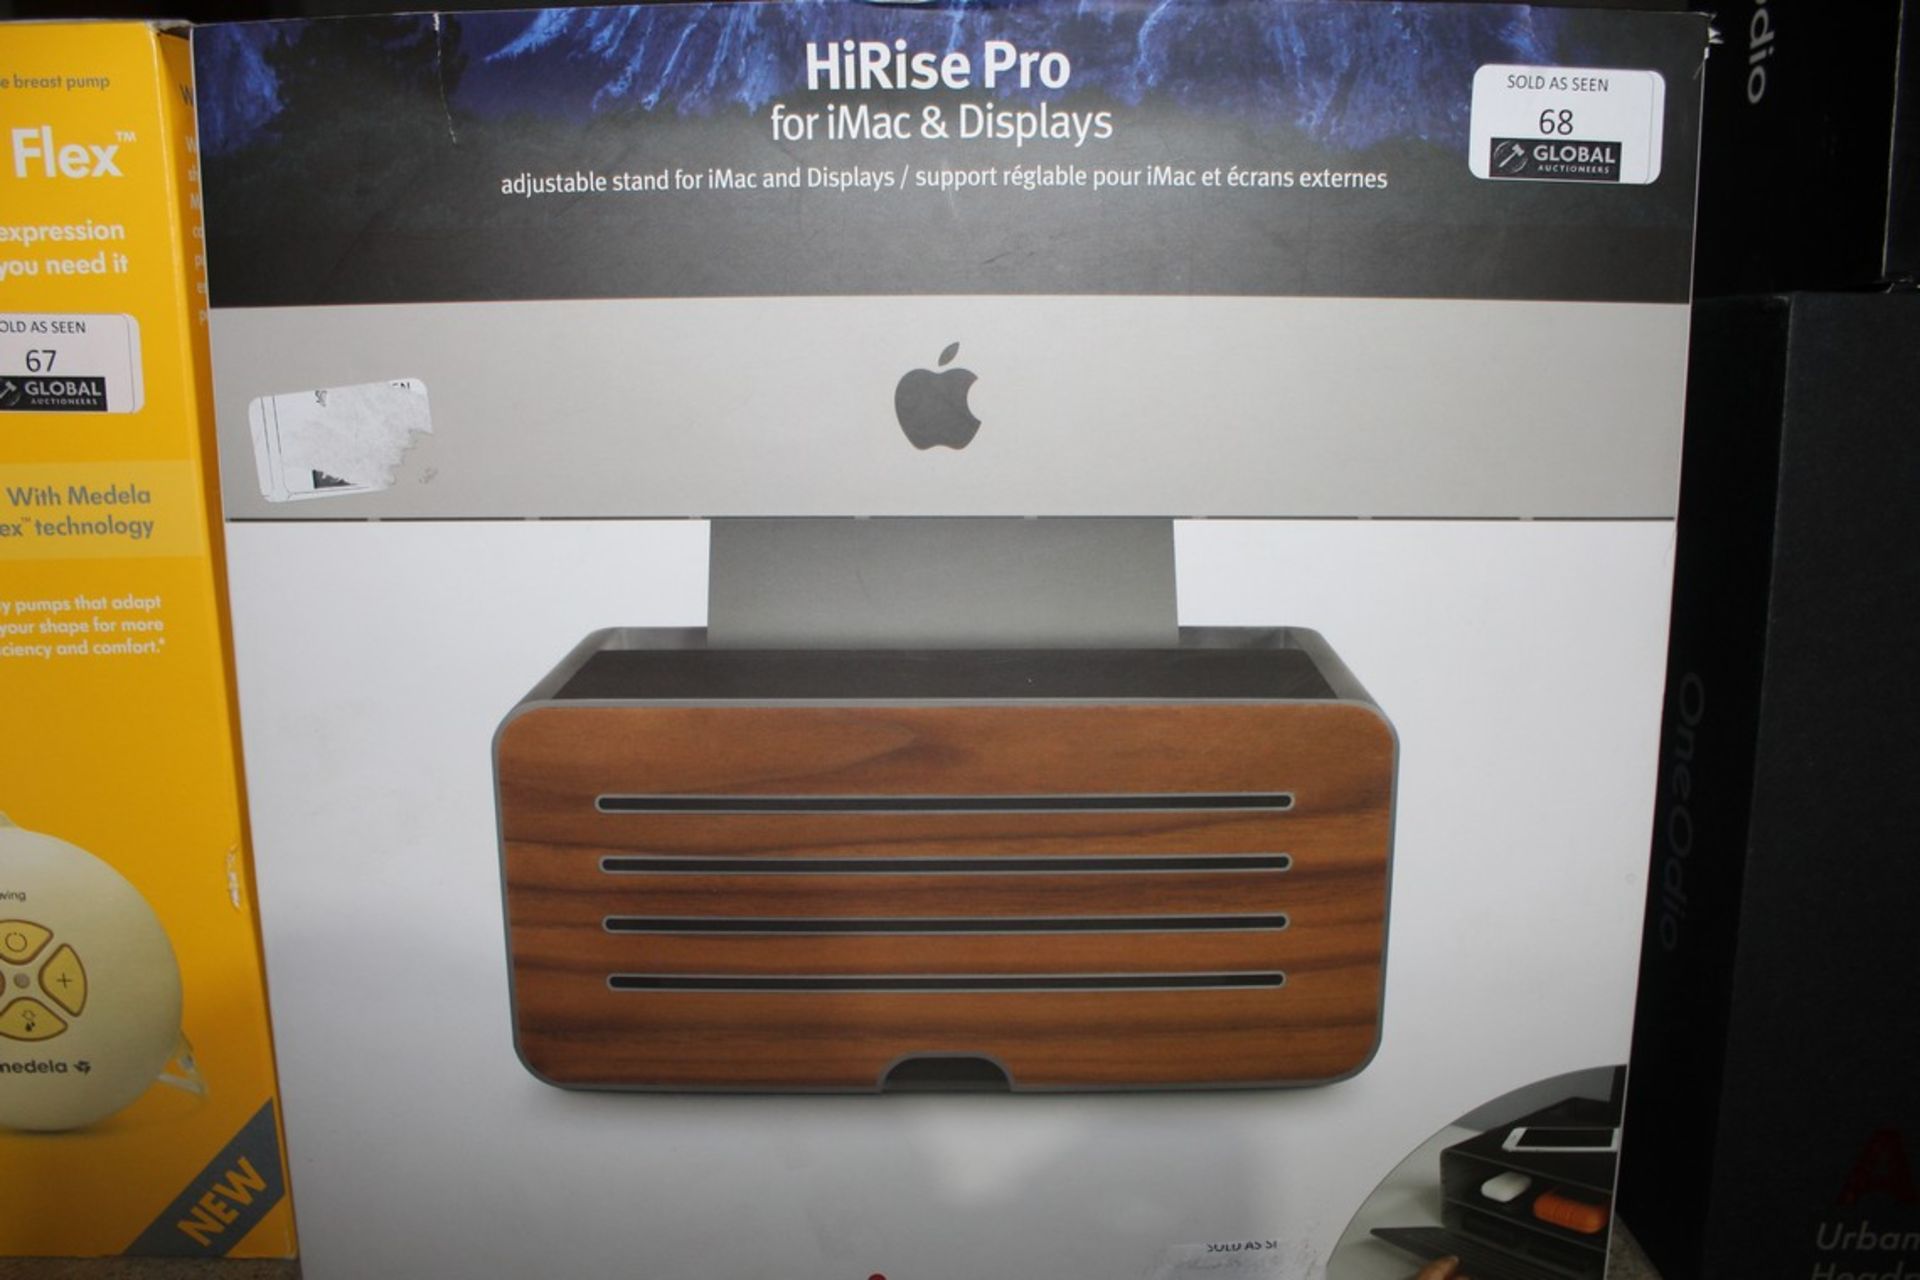 Boxed 12 South High Rise Pro iMac Display Stand RRP £80